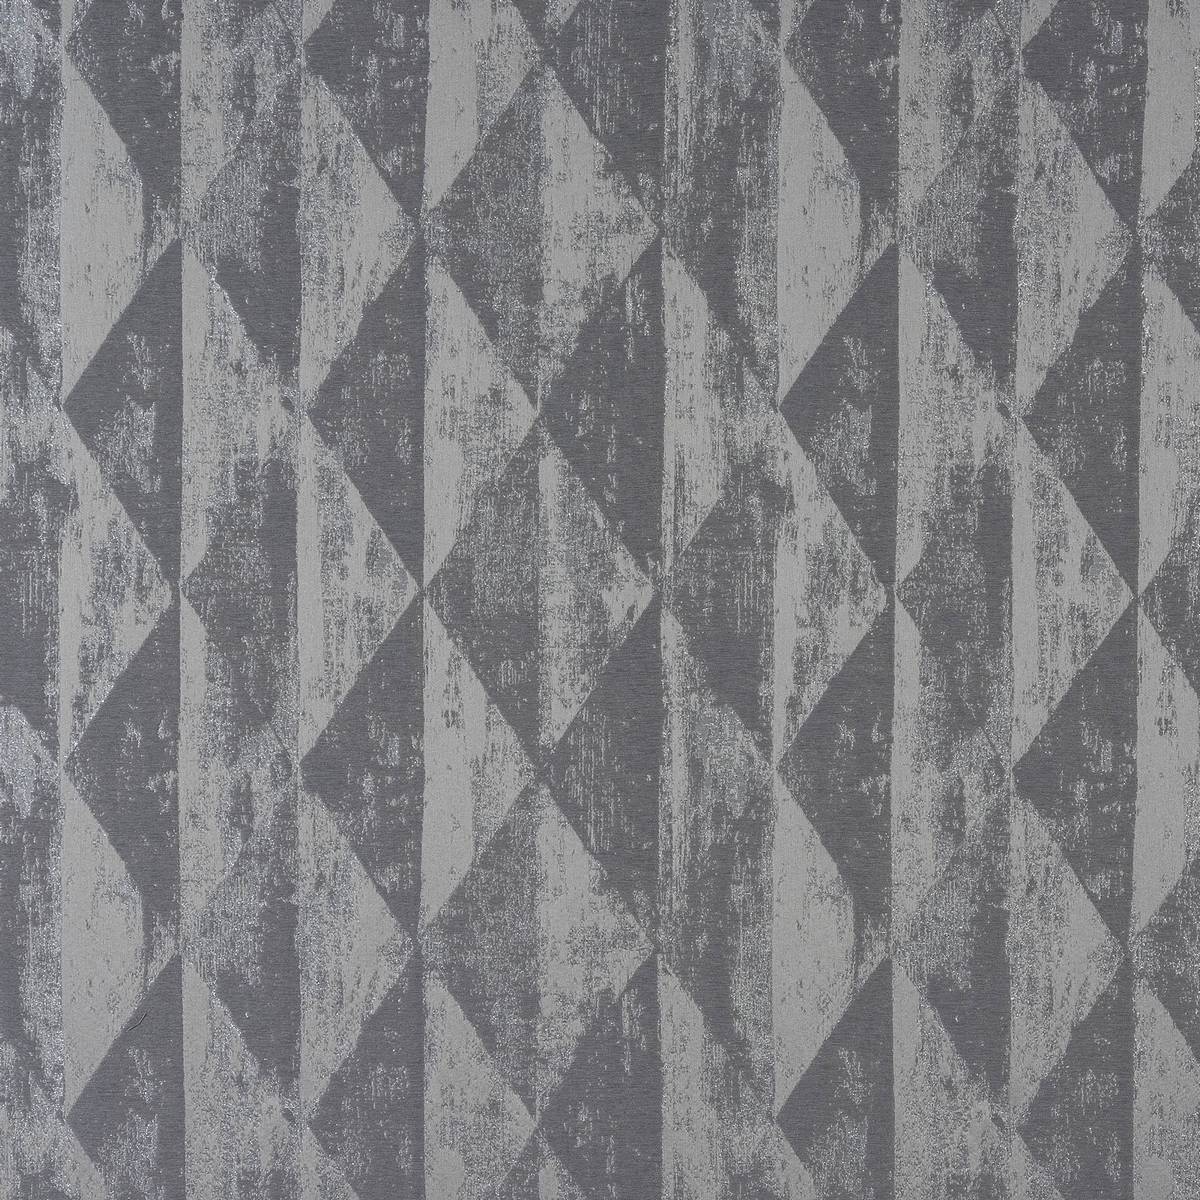 Mystique Silver Fabric by Porter & Stone